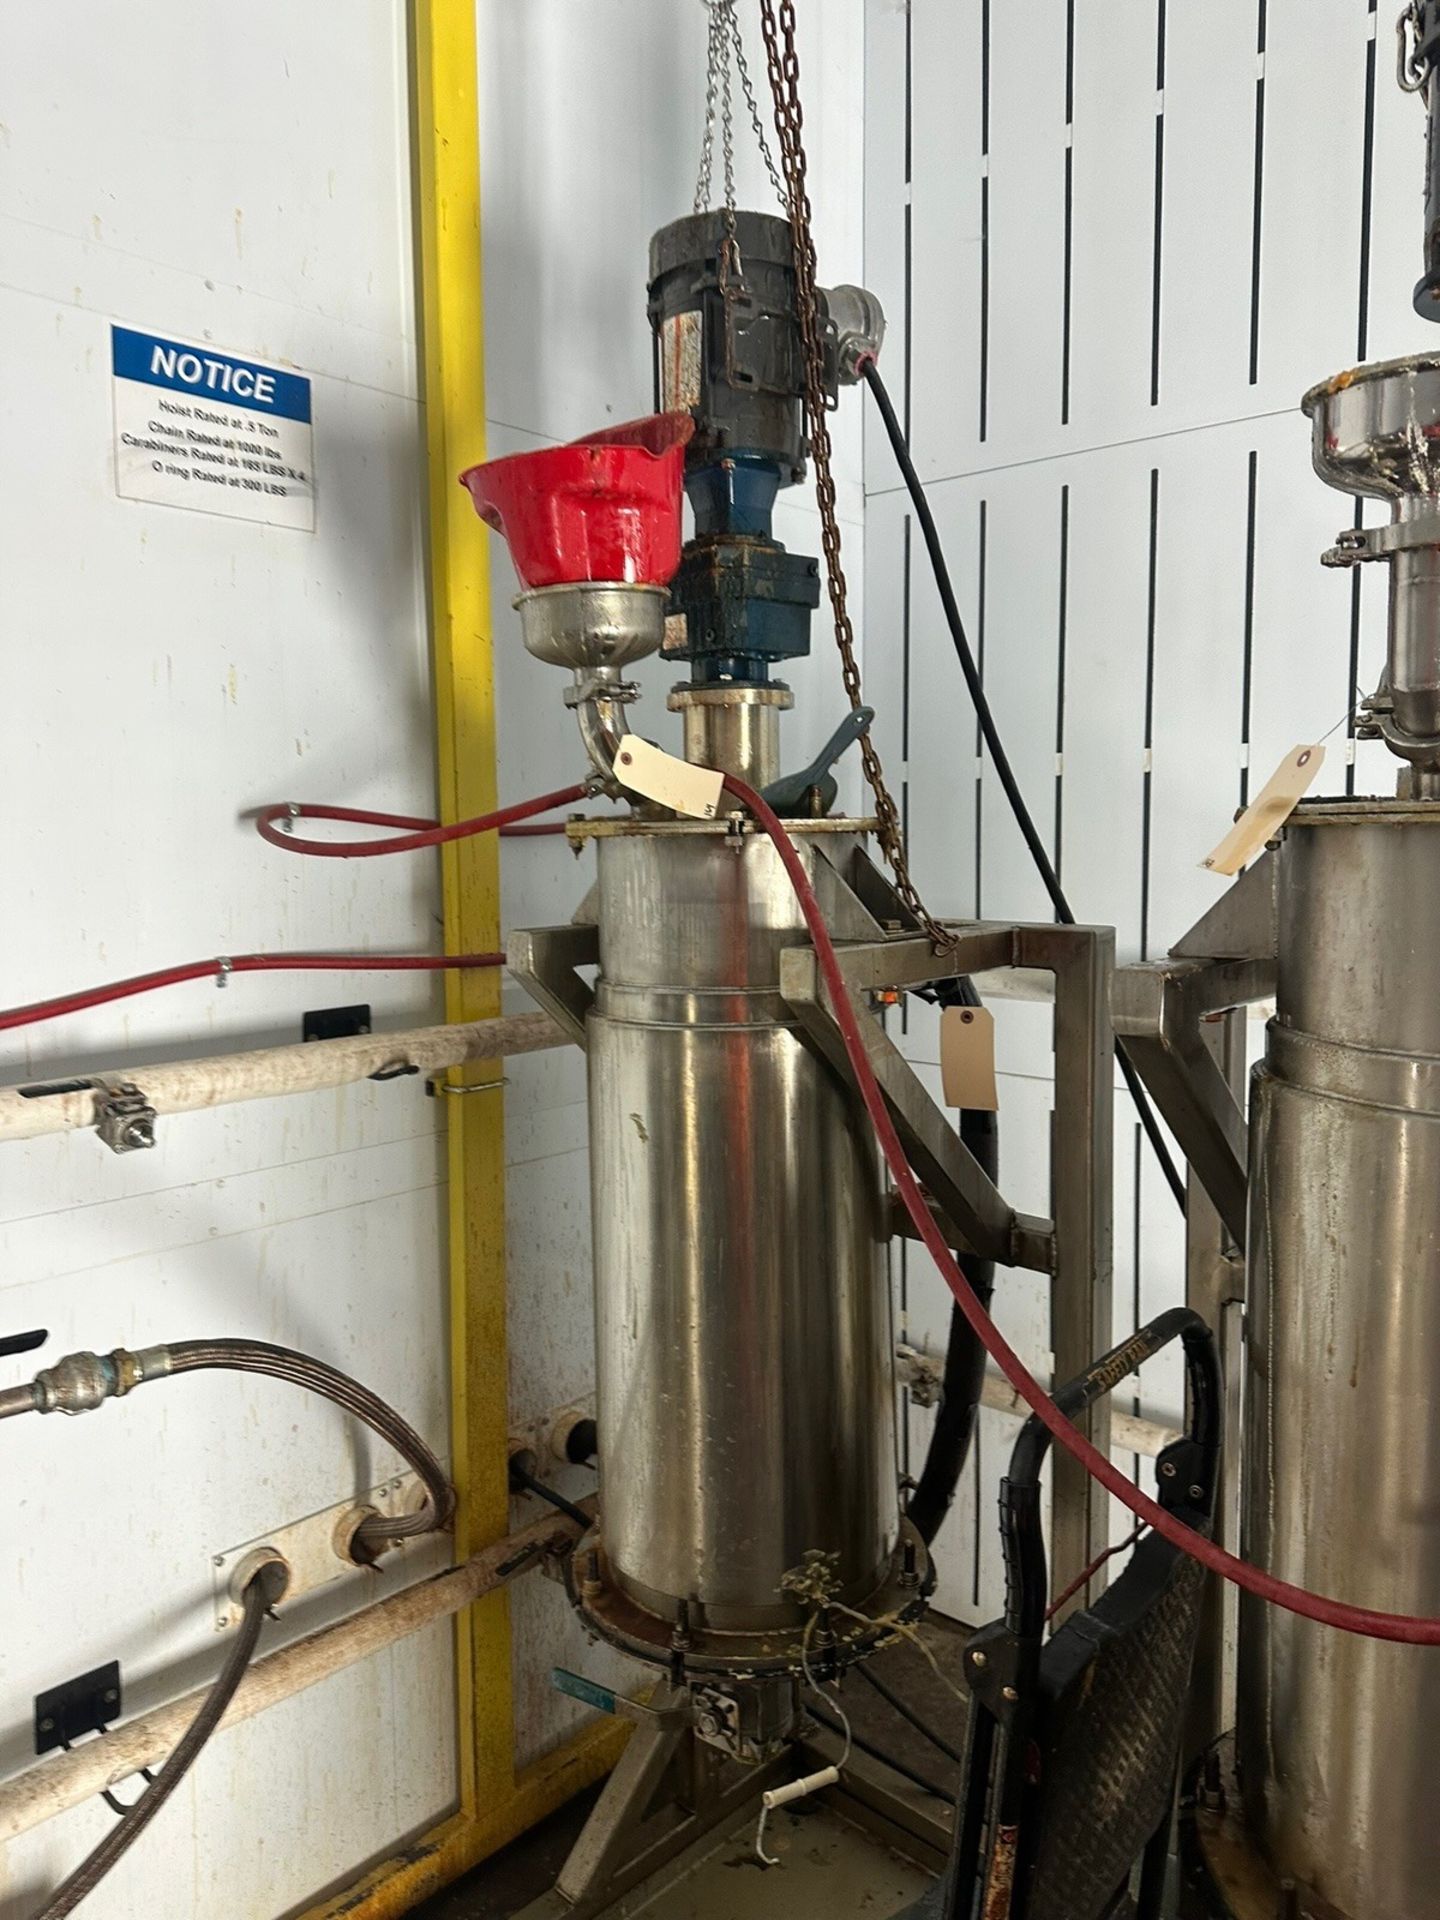 Stainless Steel Mixing Vat | Rig Fee $350